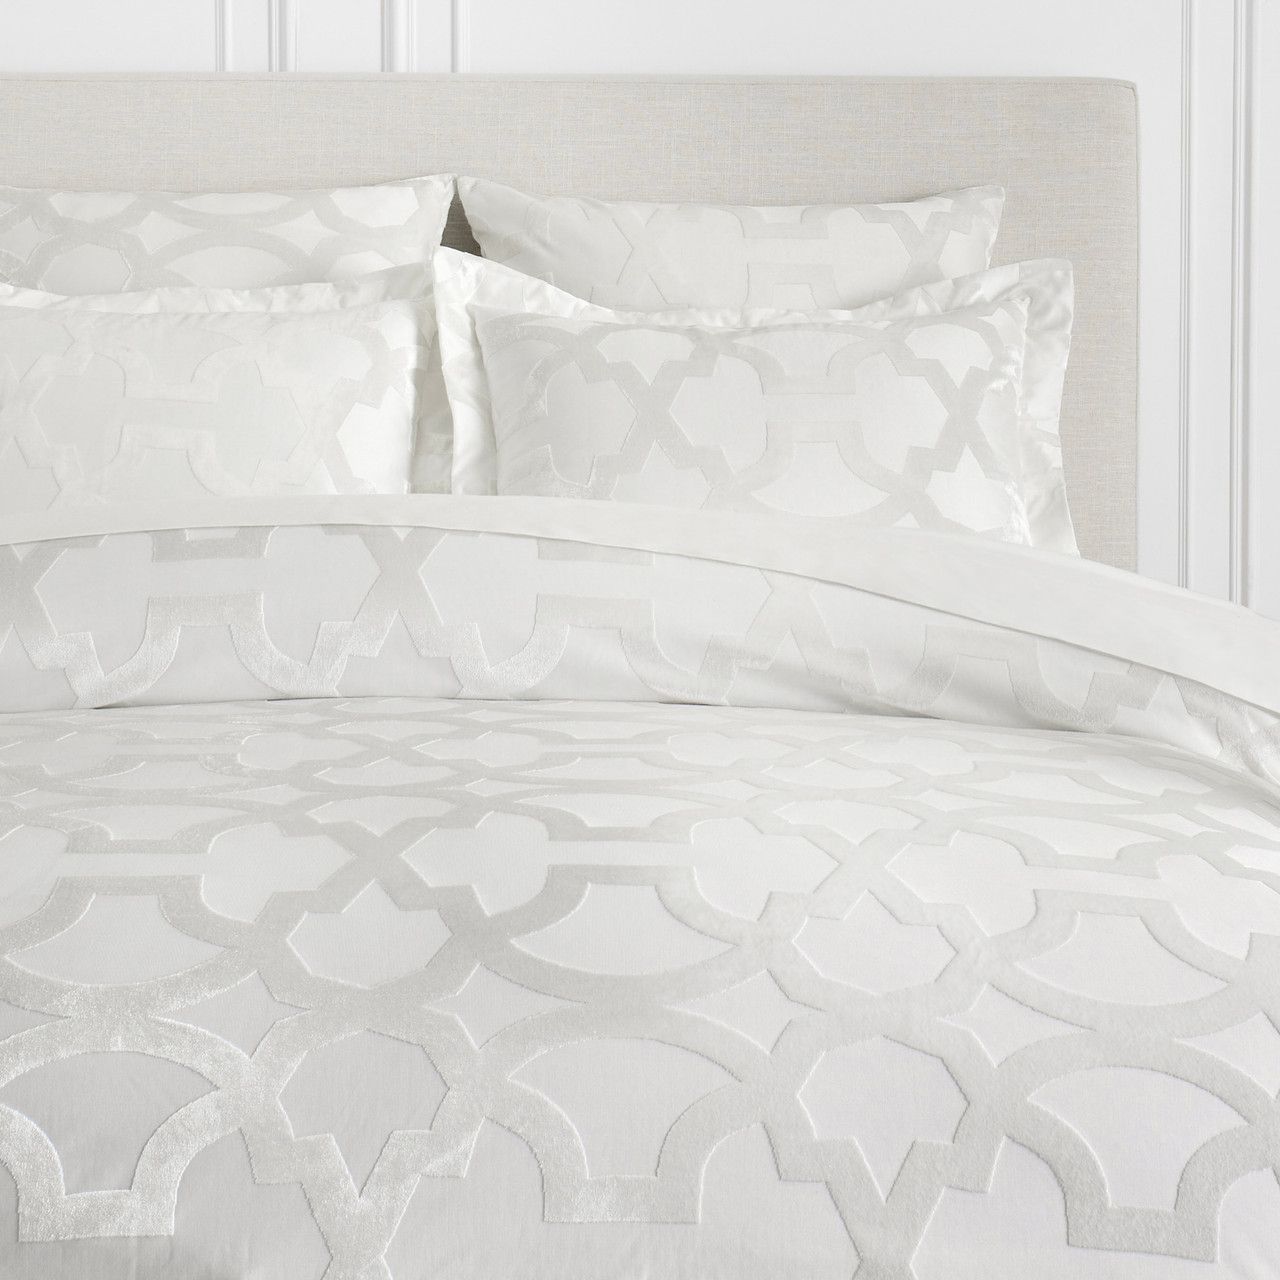 Edessa Bedding - Pearl Home Zgallerie finds zgallerie deals zgallerie home decor zgallerie sales | Z Gallerie